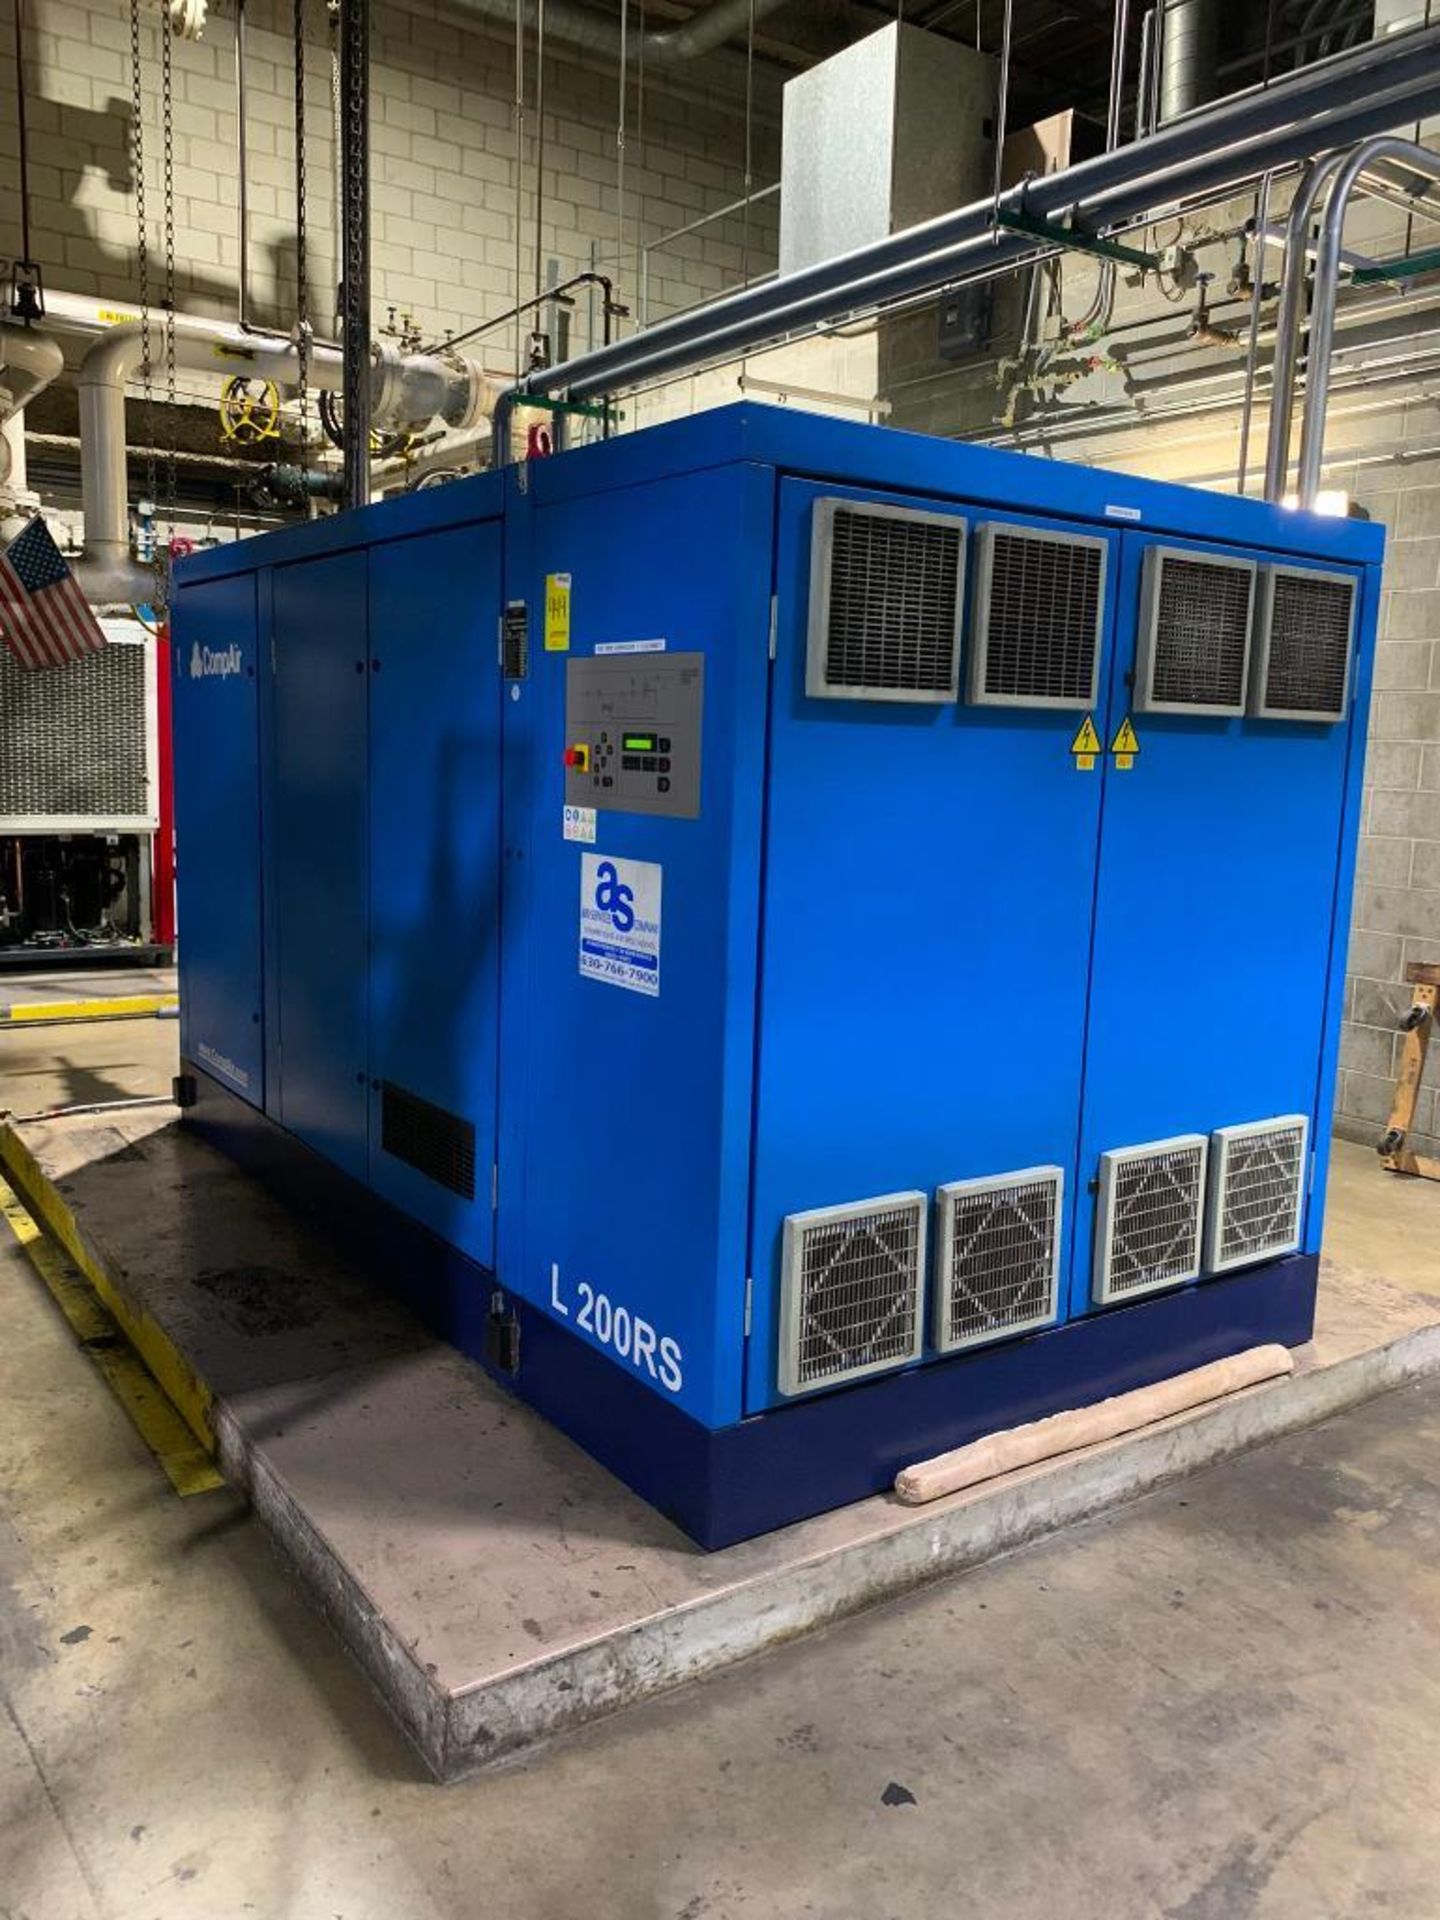 2008 CompAir 200-KW Air Compressor, Type L200RS-9W, 460/60/3, S/N S/N 349031/0782 (Delayed Removal -